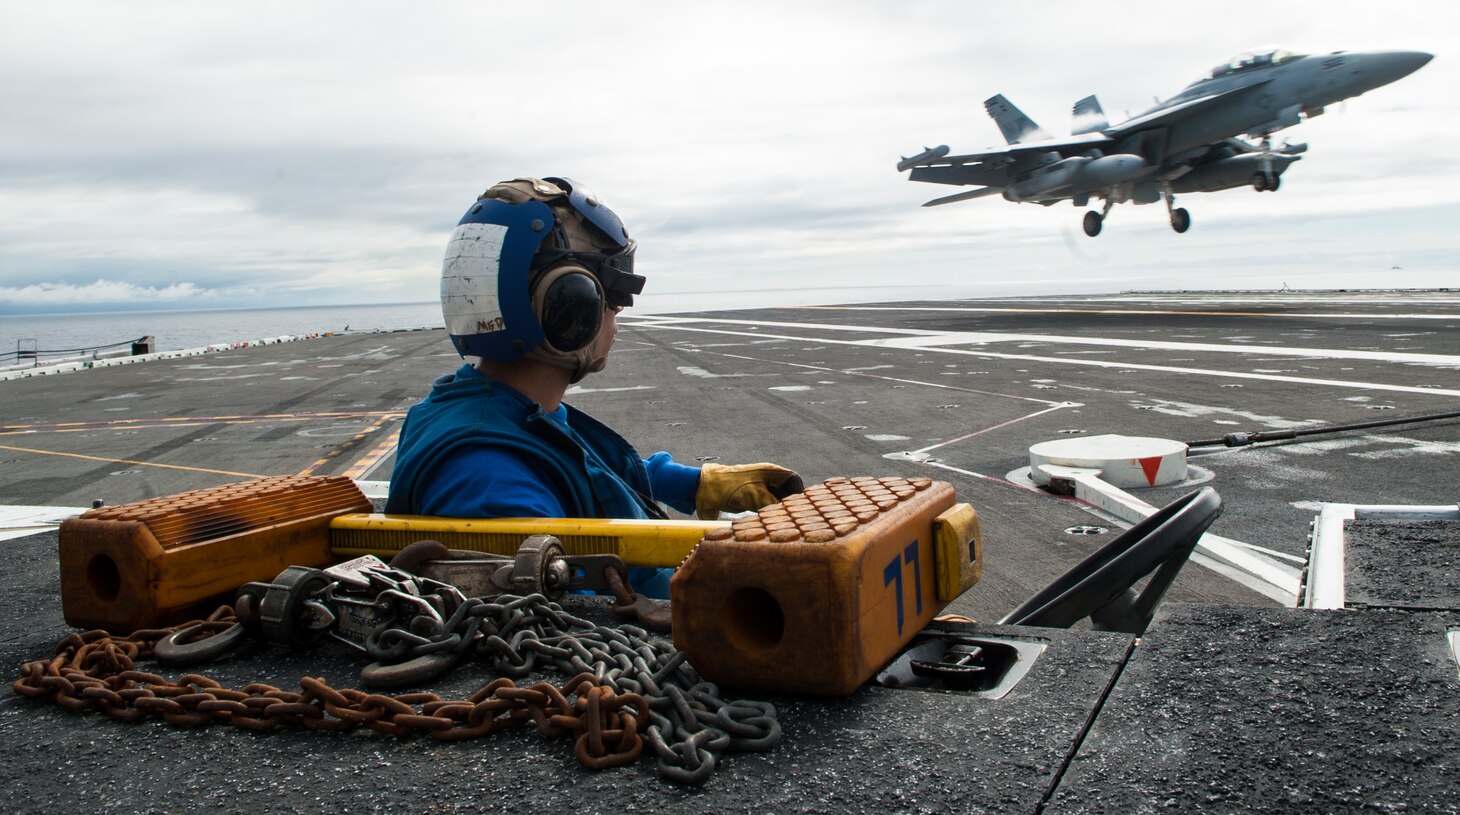 Aviation Boatswain's Mate Airman Alexander Dooley, from Bradenton, Florida, observes an EA-18G Growler, assigned to Strike Fighter Squadron (VAQ) 141, as it lands on the flight deck during carrier qualifications with the Navy's forward-deployed aircraft carrier, USS Ronald Reagan (CVN 76), and Carrier Air Wing 5. Ronald Reagan, the flagship of Carrier Strike Group 5, provides a combat-ready force that protects and defends the collective maritime interests of its allies and partners in the Indo-Pacific region.